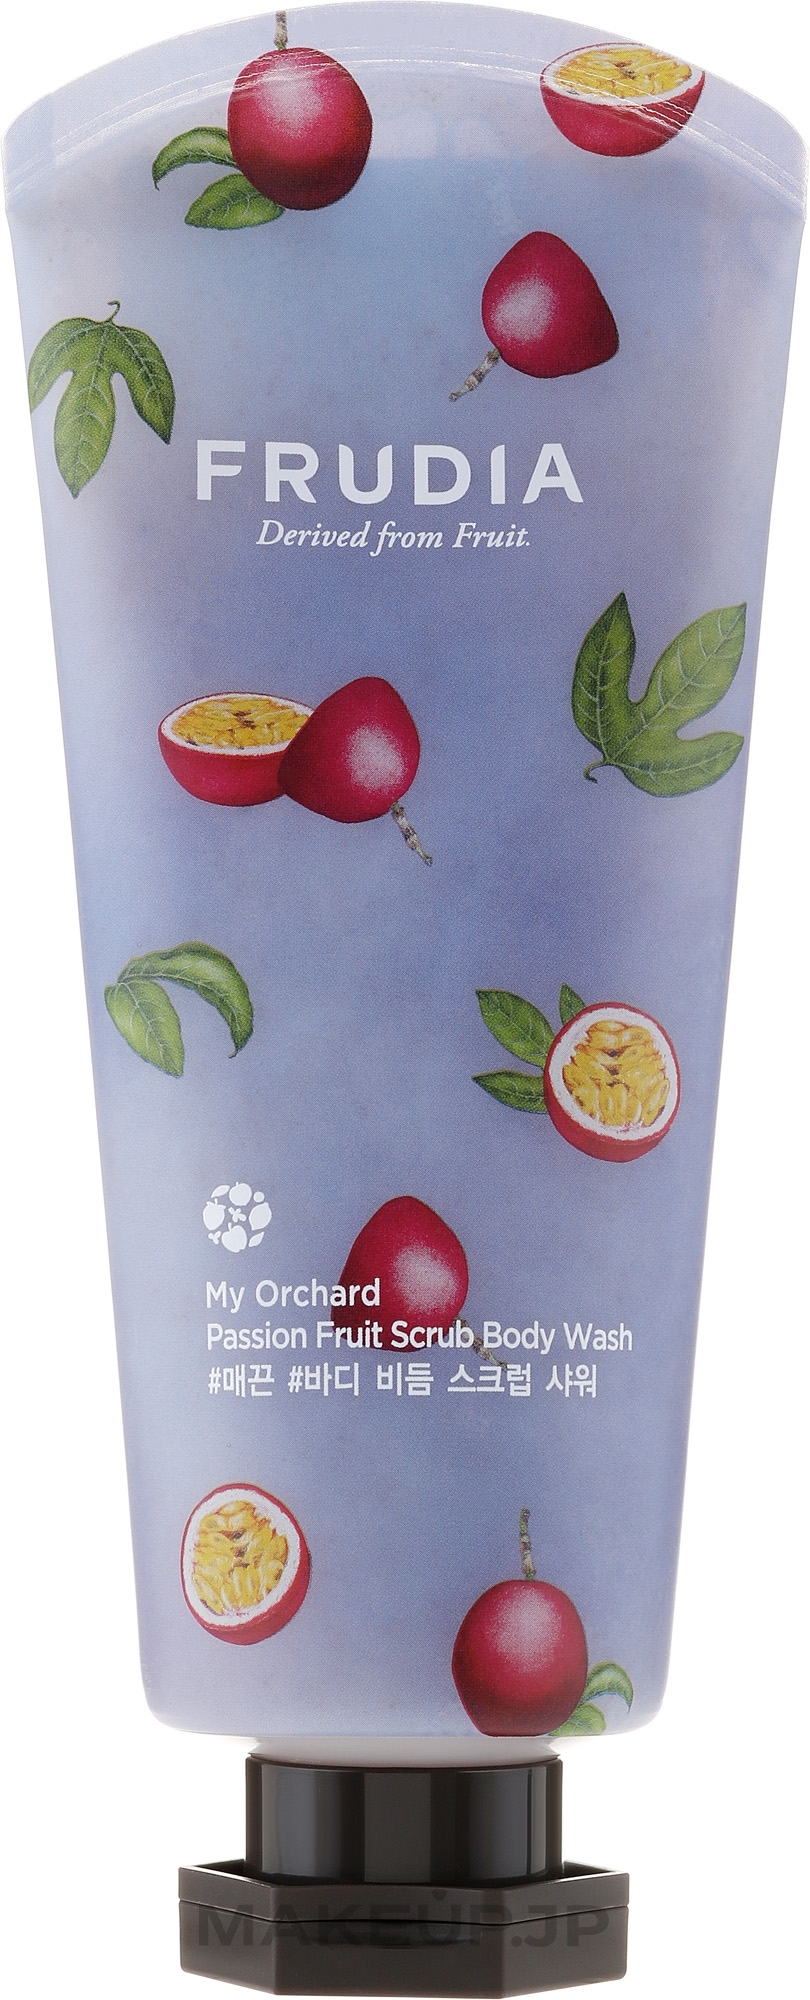 Passionfruit Scented Scrab Body Wash - Frudia My Orchard Passion Fruit Scrub Body Wash — photo 200 ml